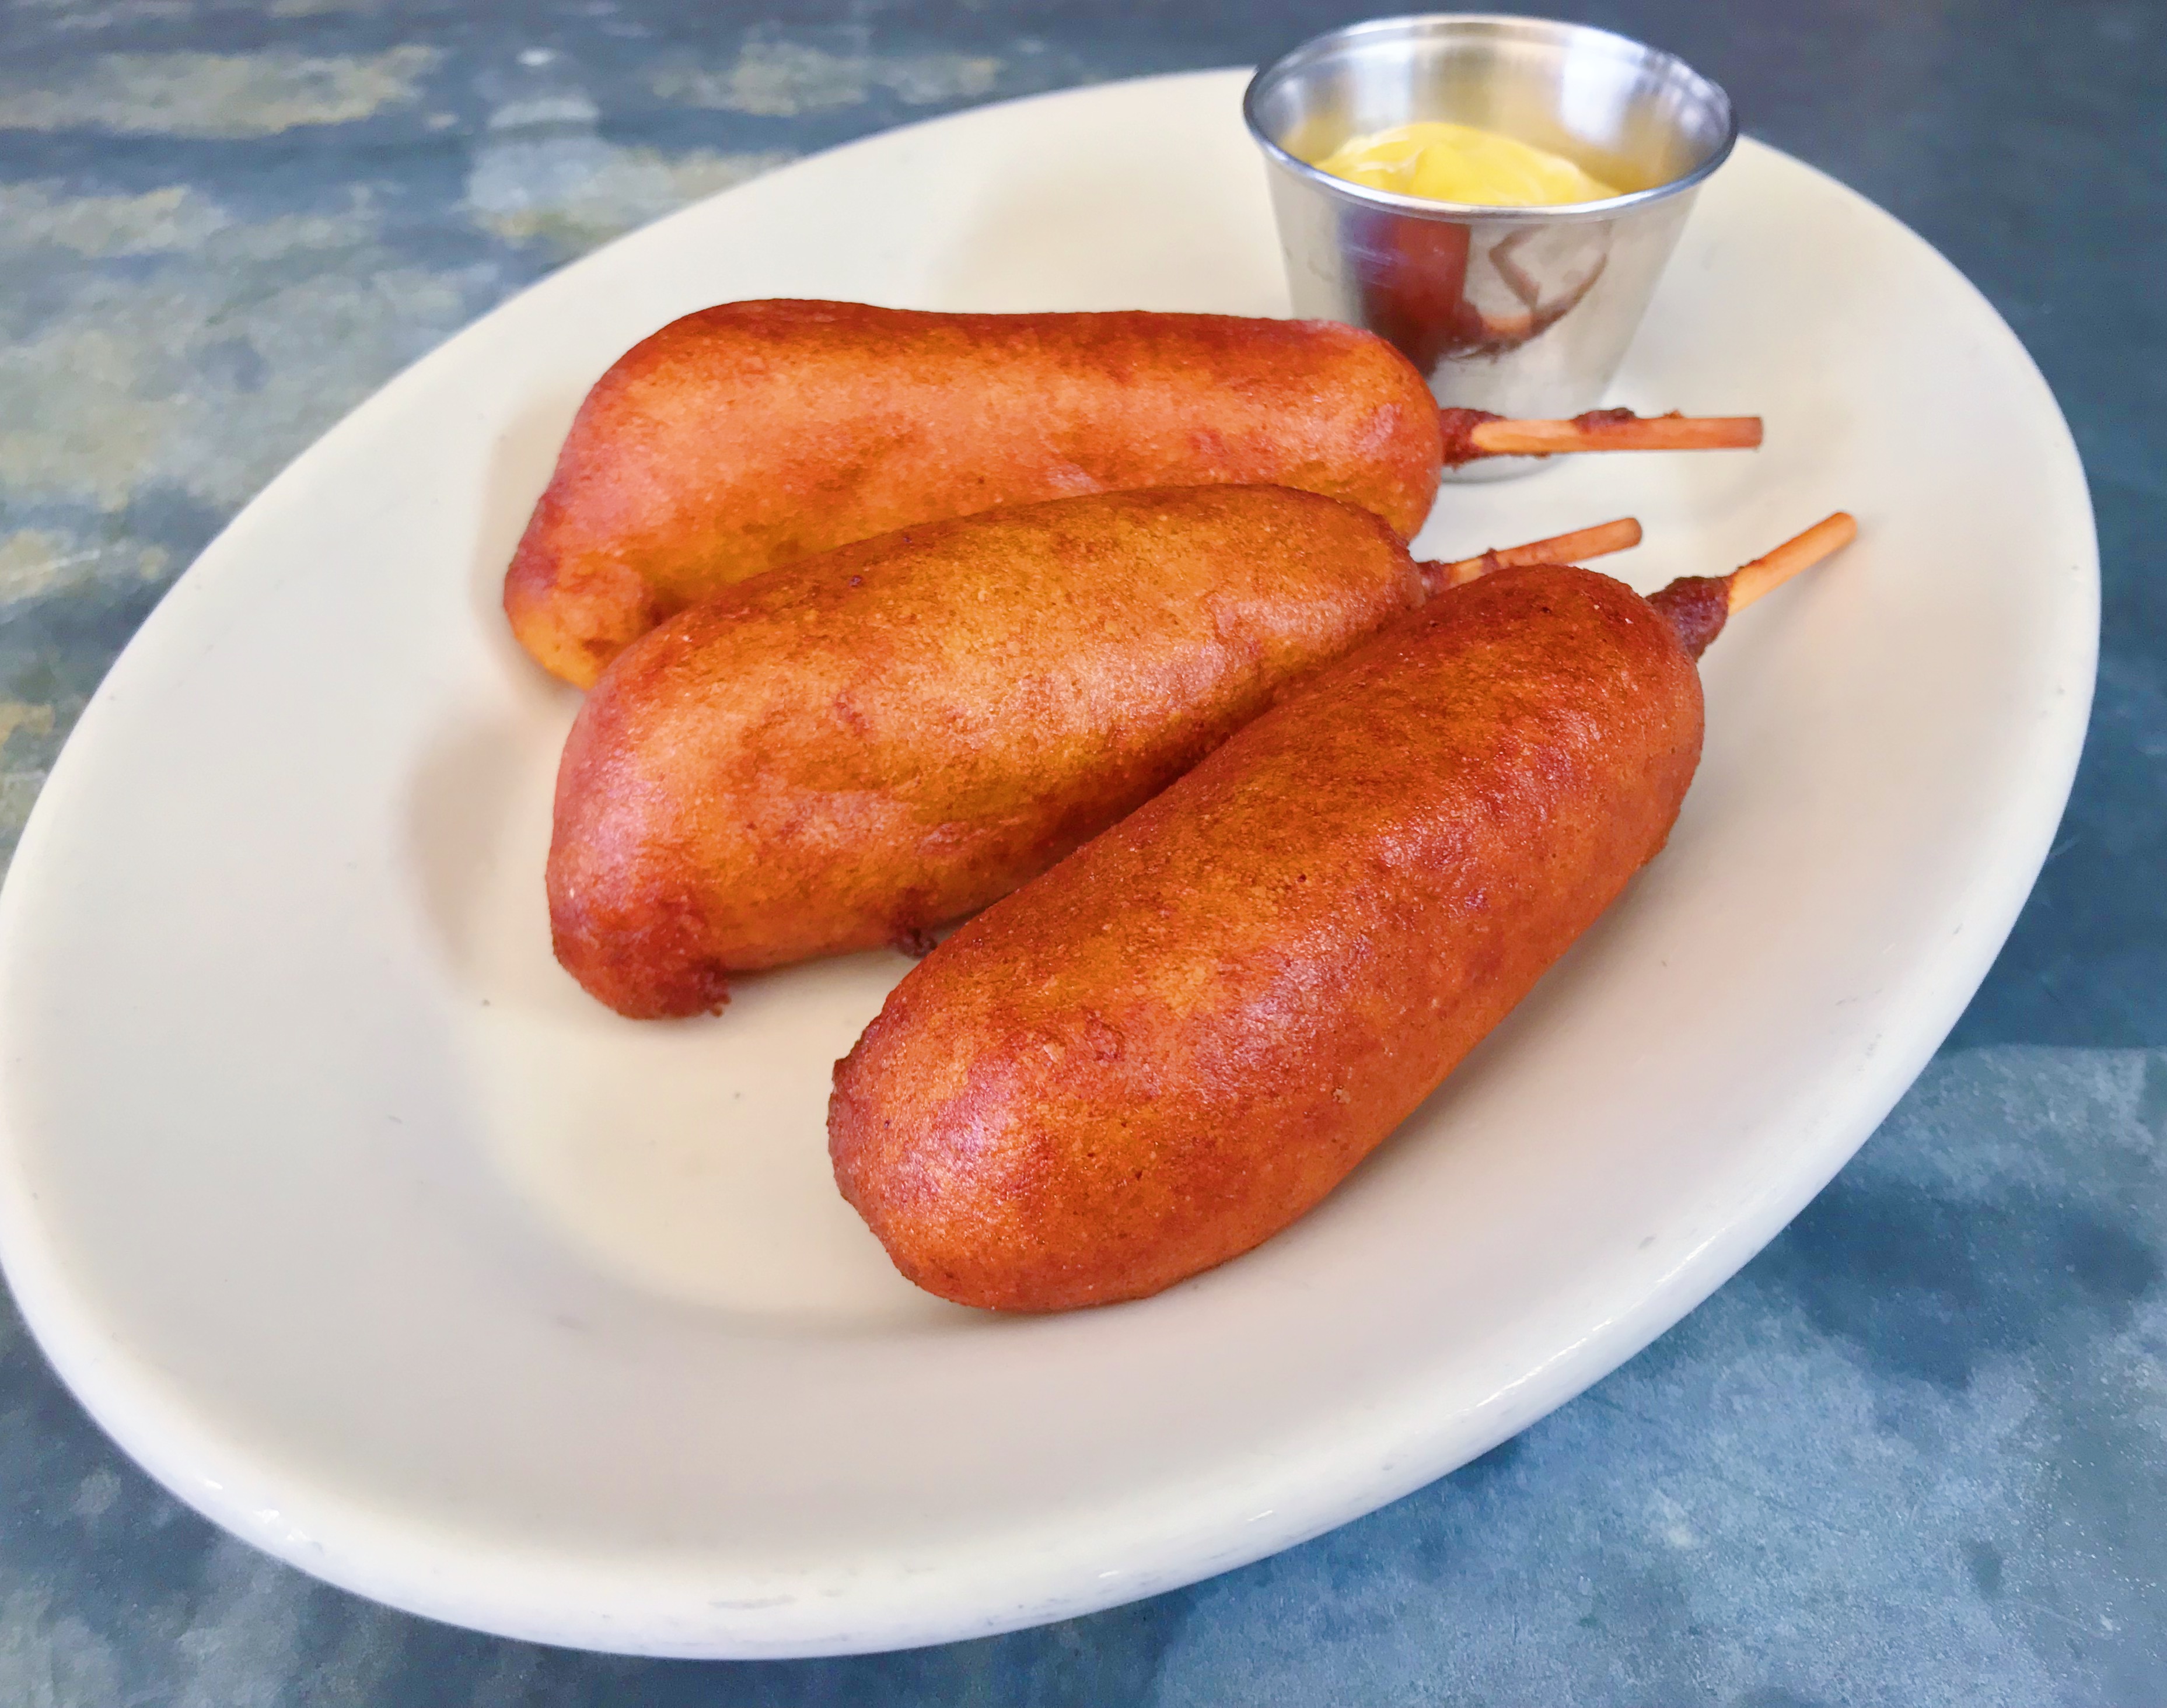 Plate of three corn dogs with a side of yellow mustard.